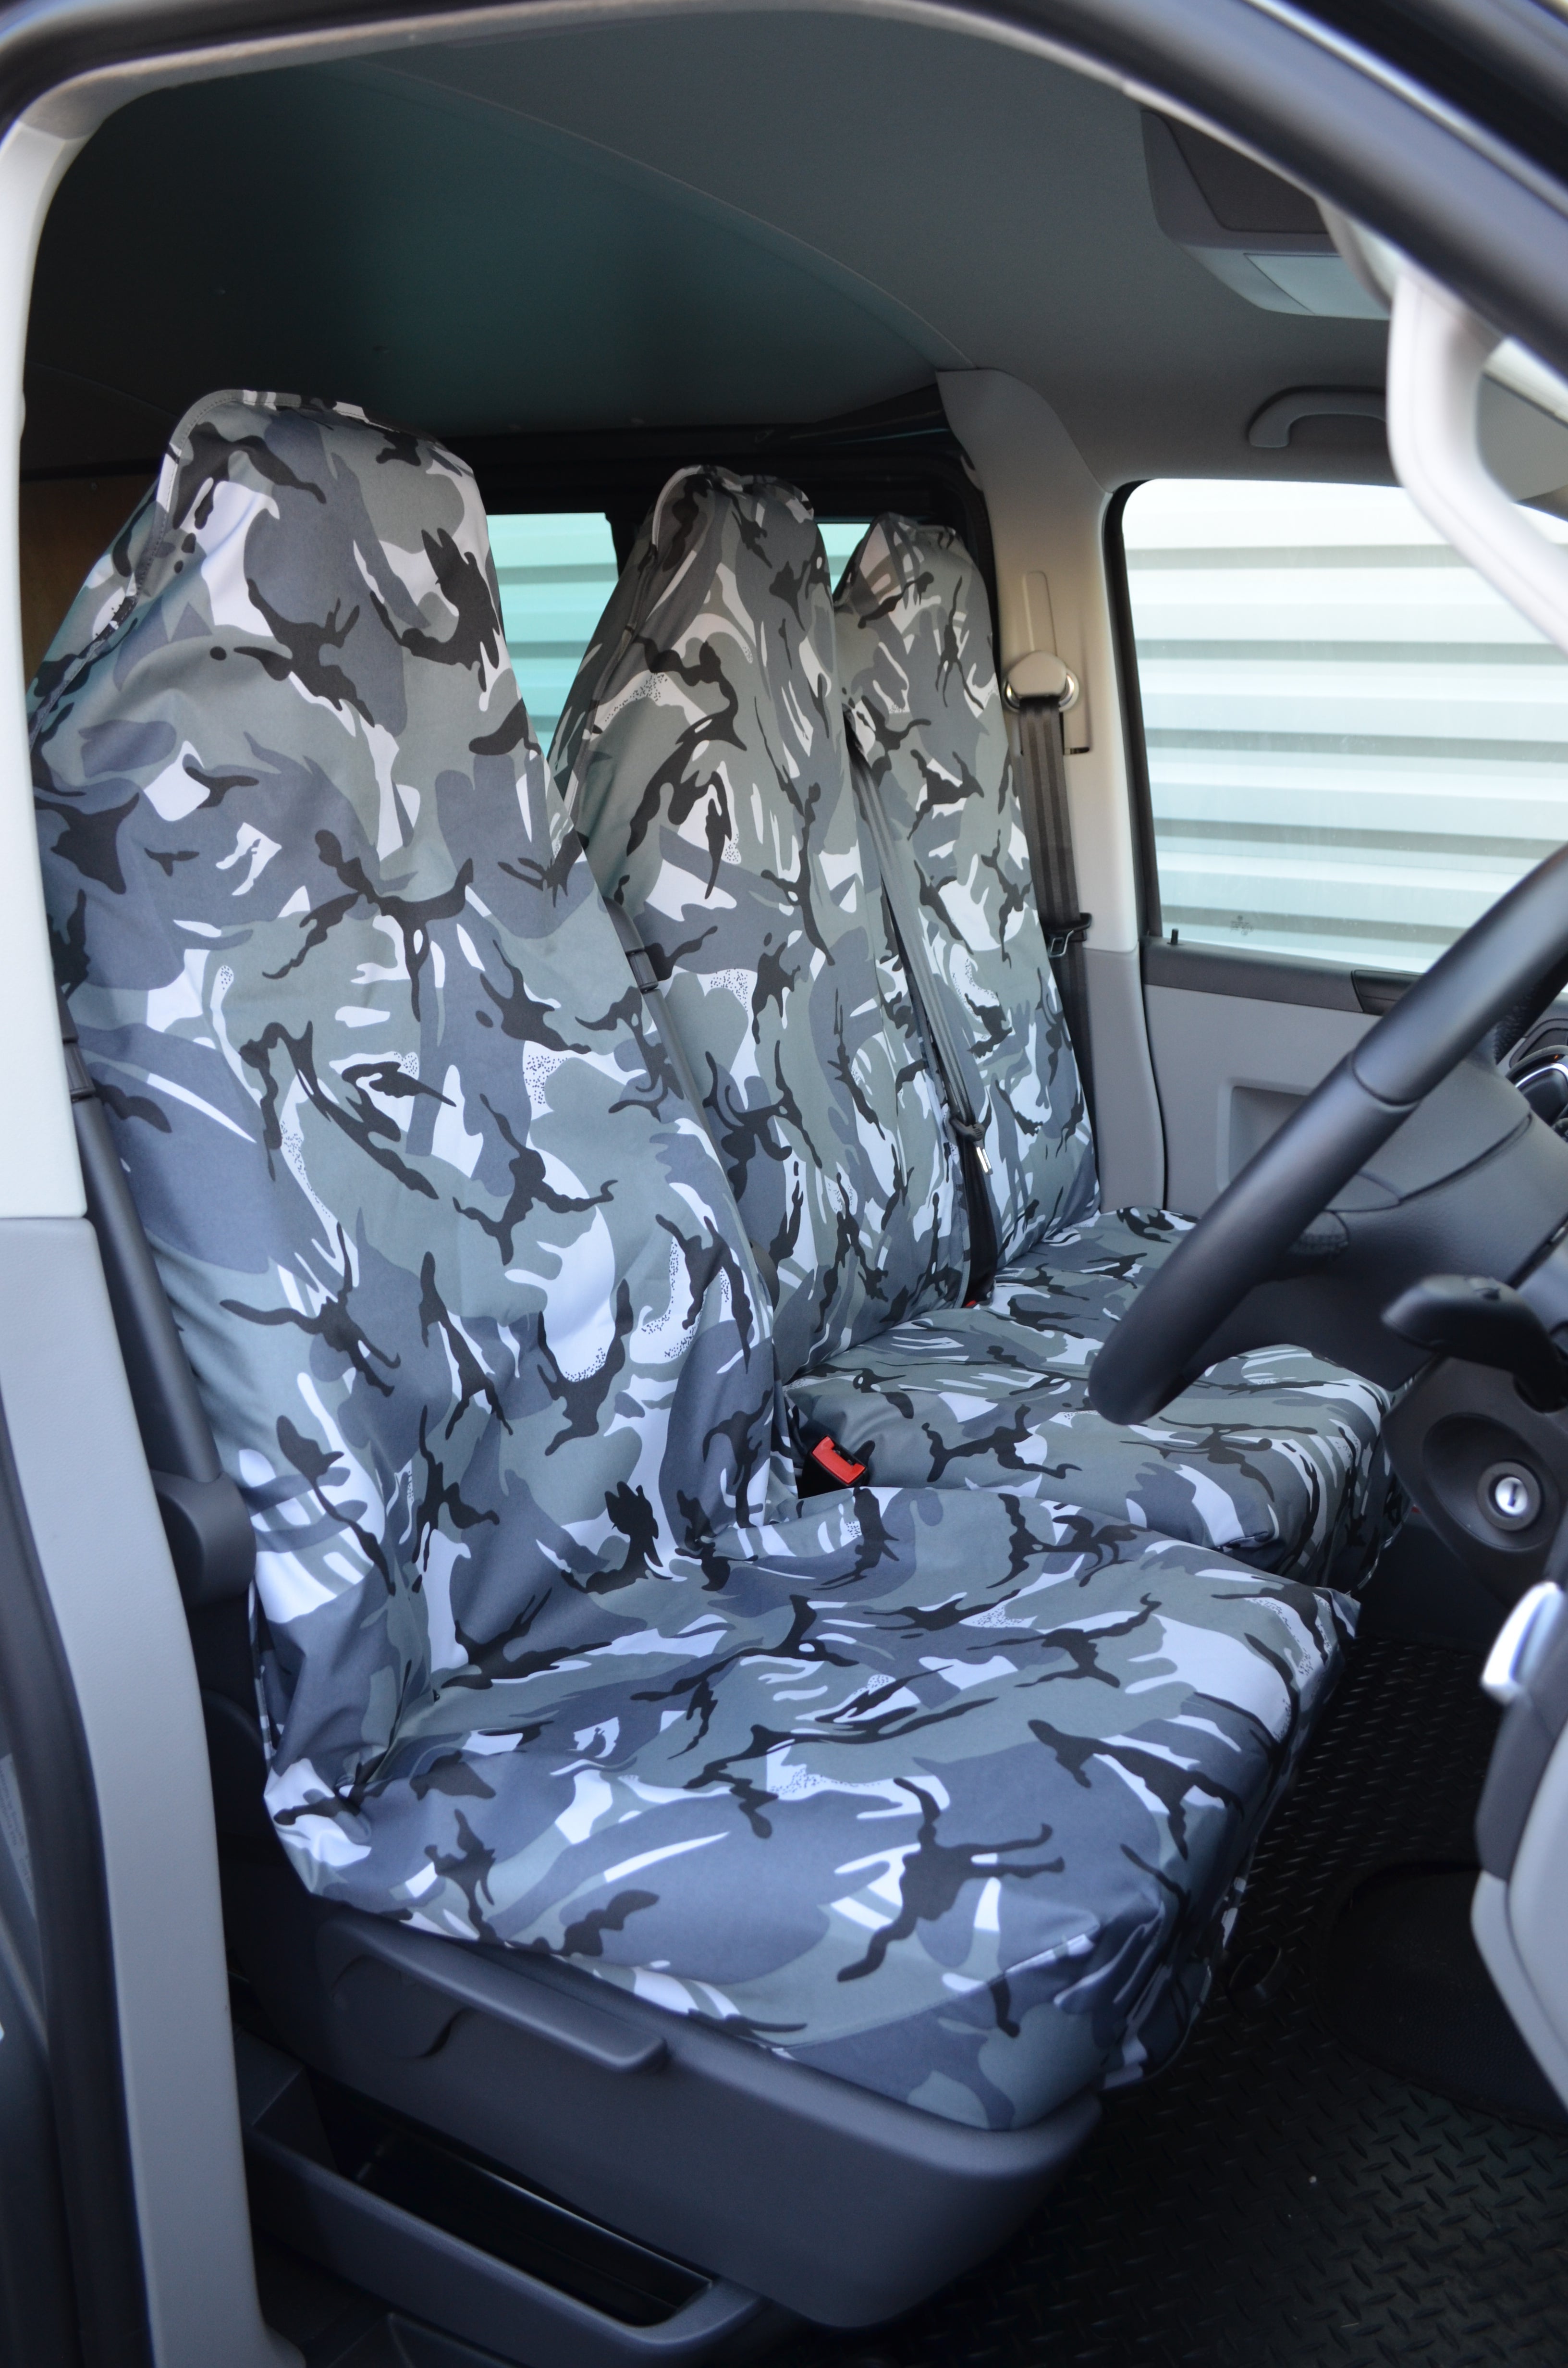 Universal Seat Covers (Single and Double) for Medium Vans